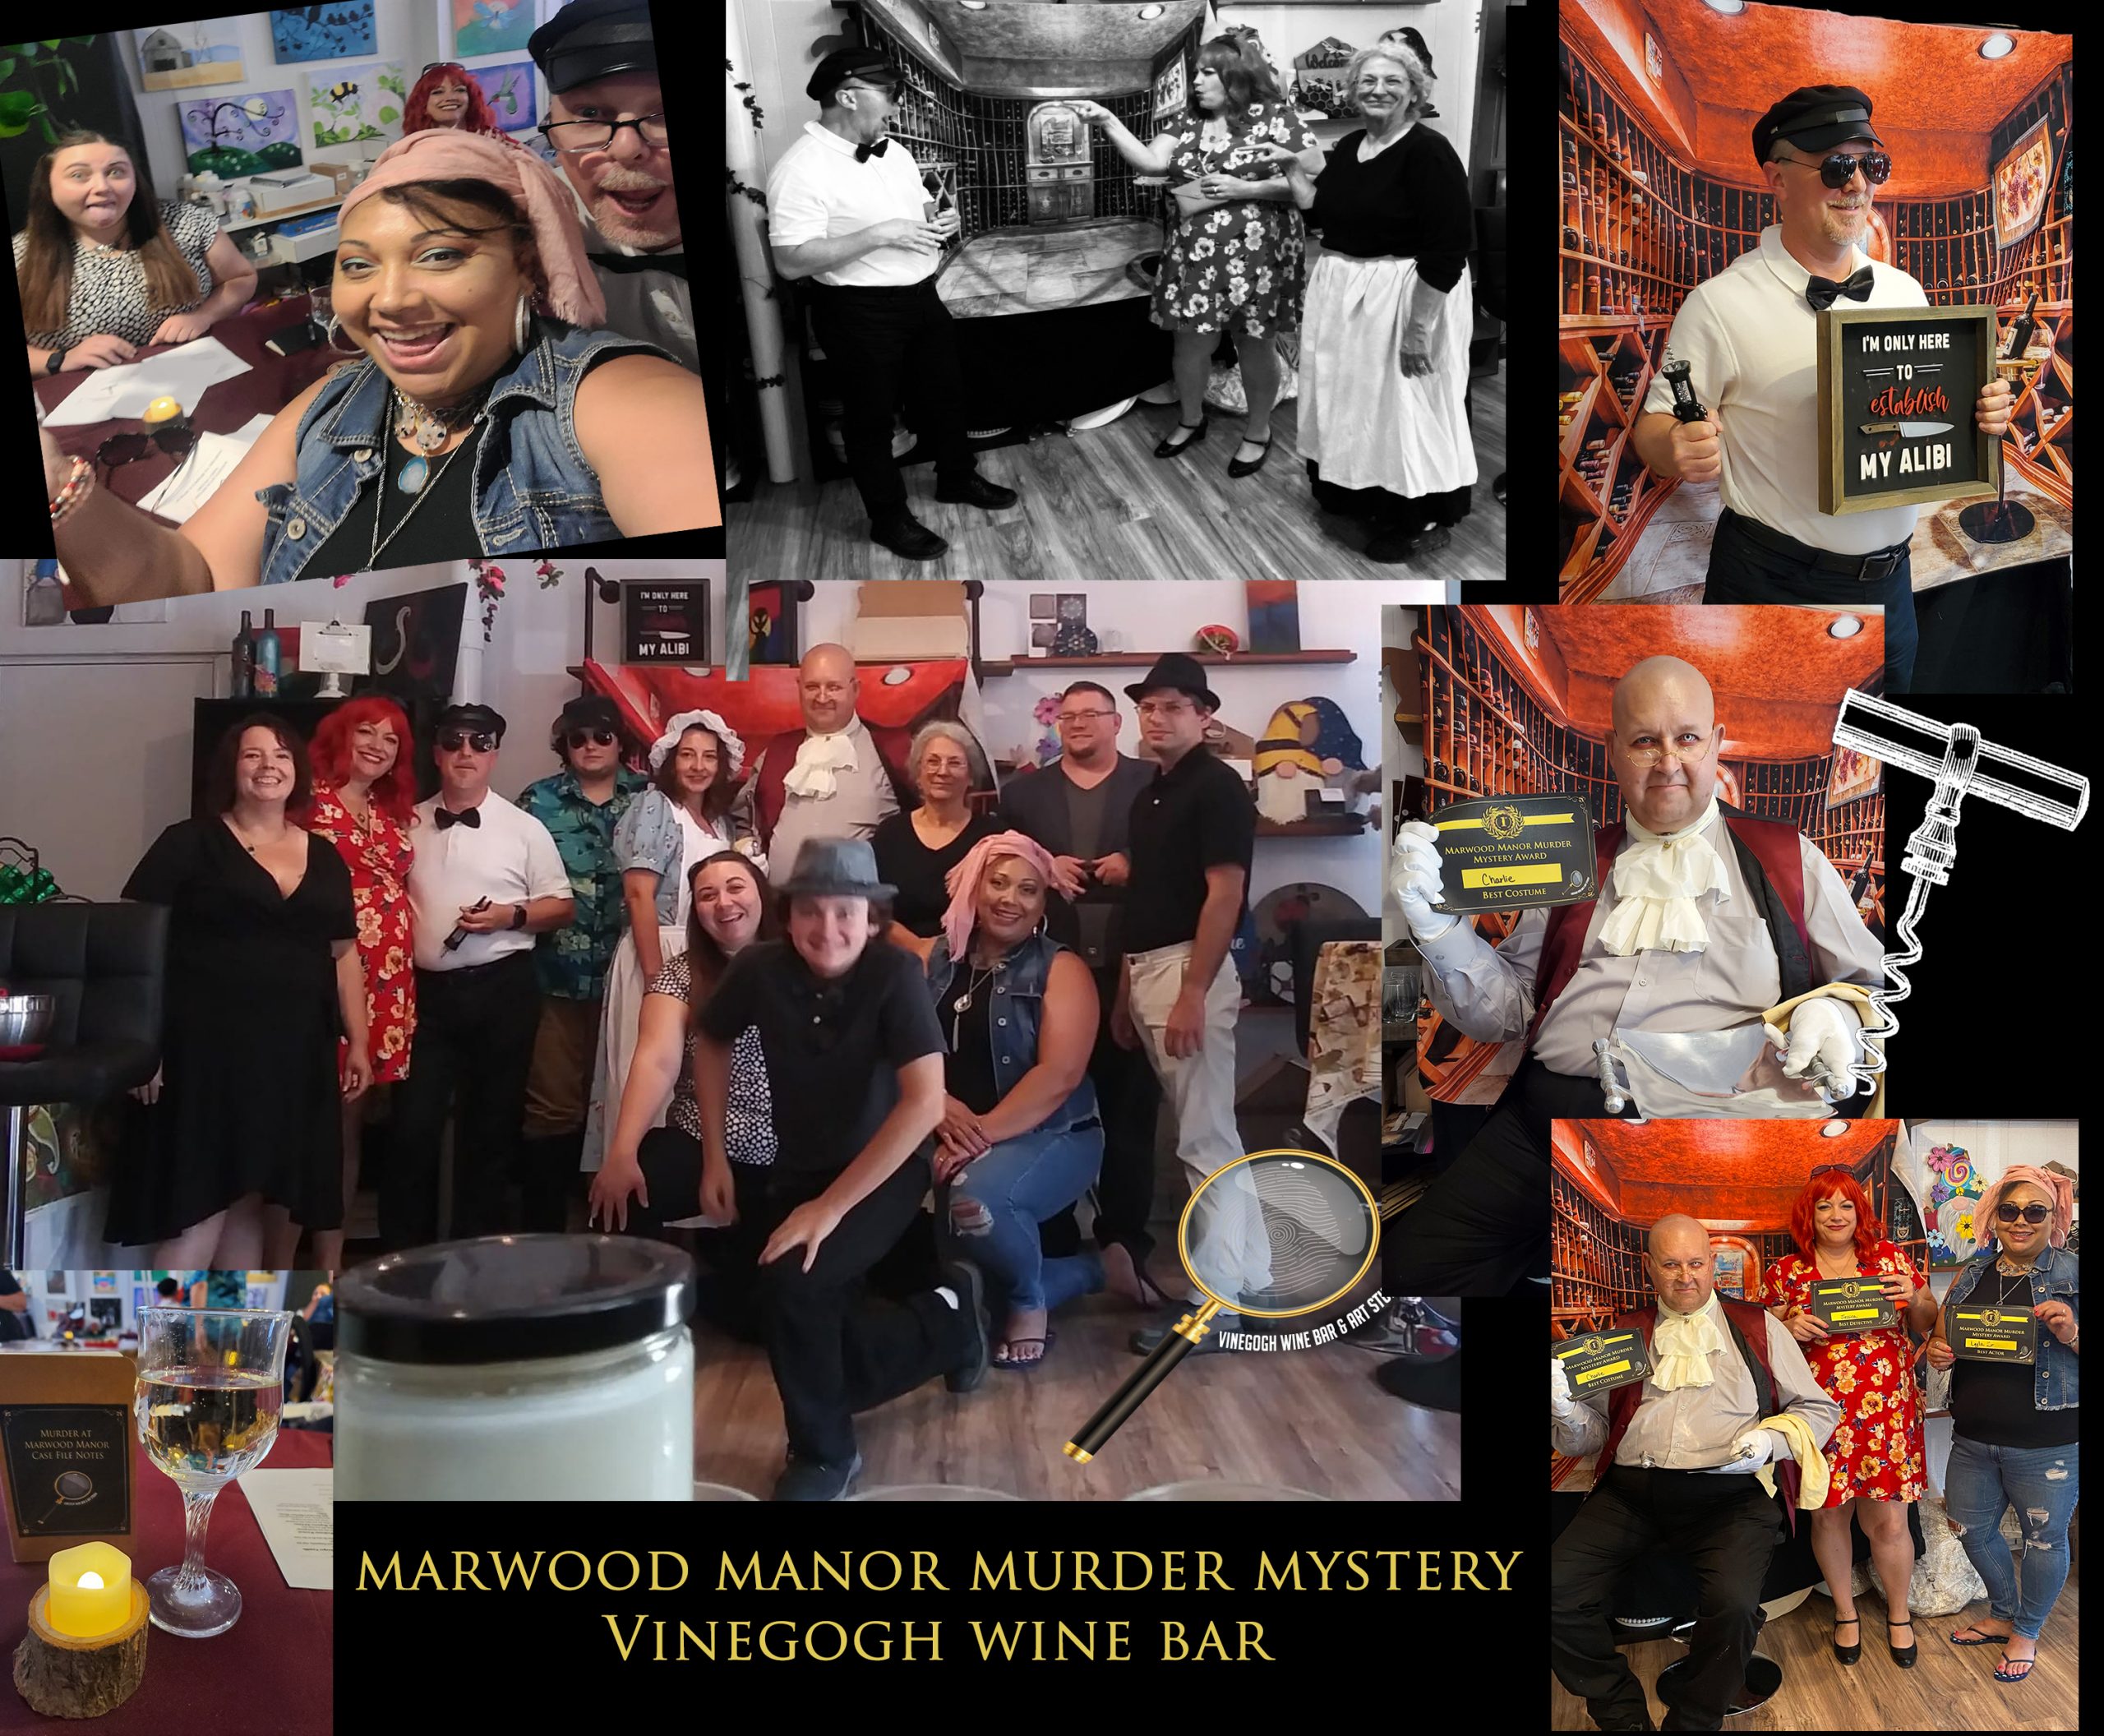 Friday the 13th Murder Mystery at Highland Emporium!